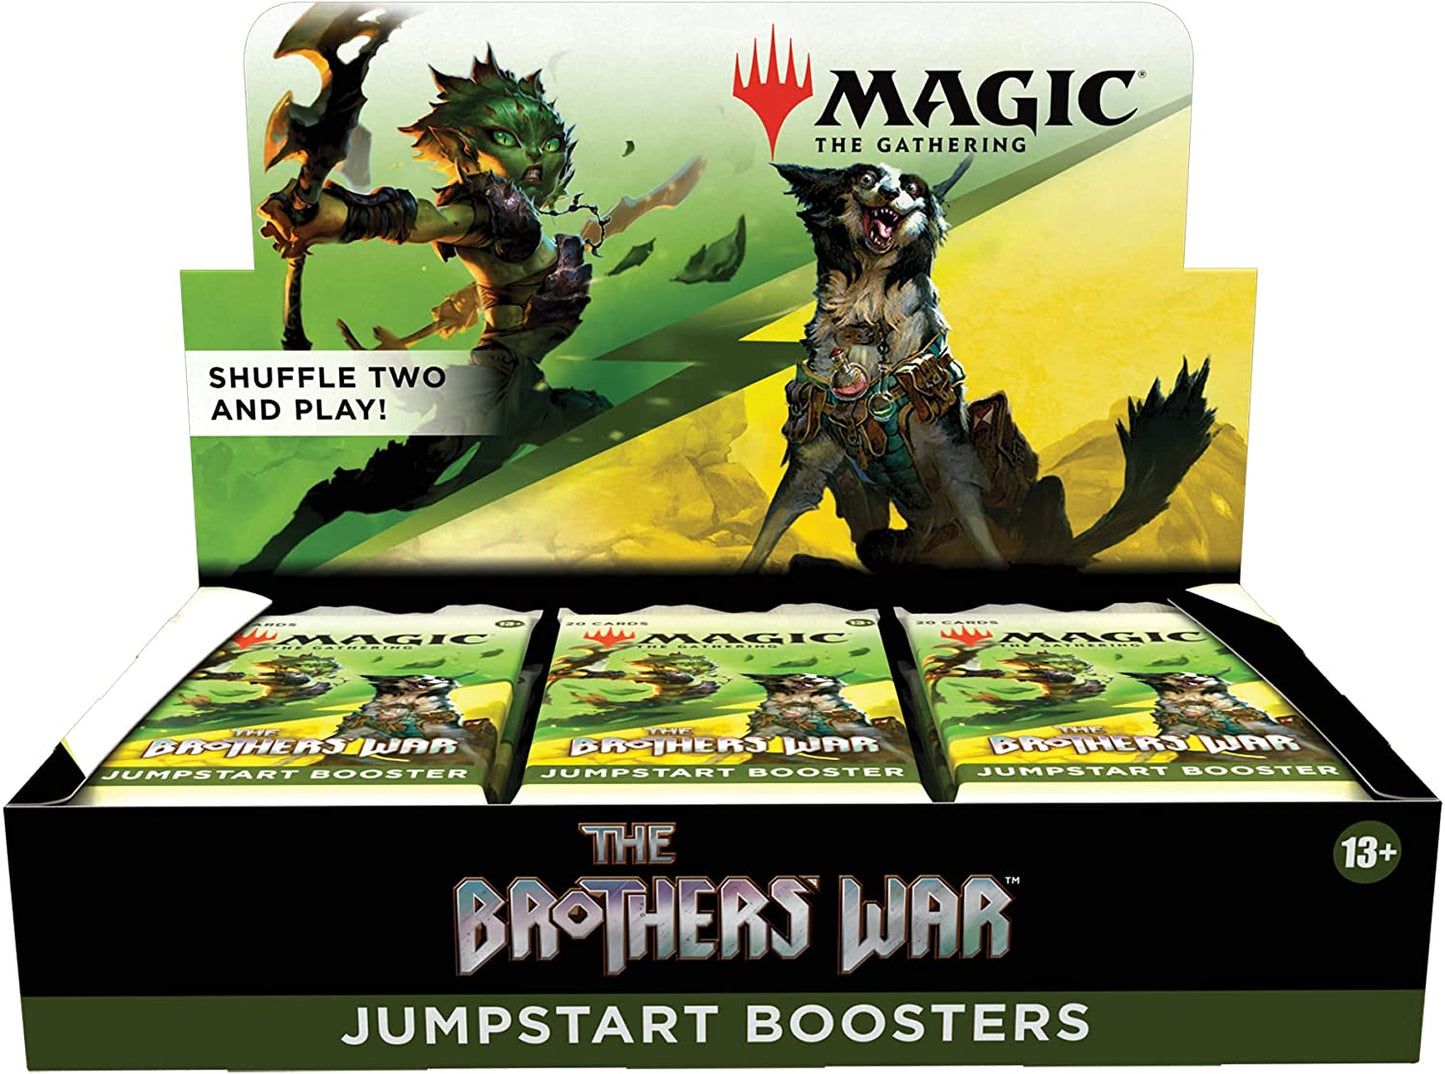 Magic: The Gathering Jumpstart Booster Box - The Brothers’ War